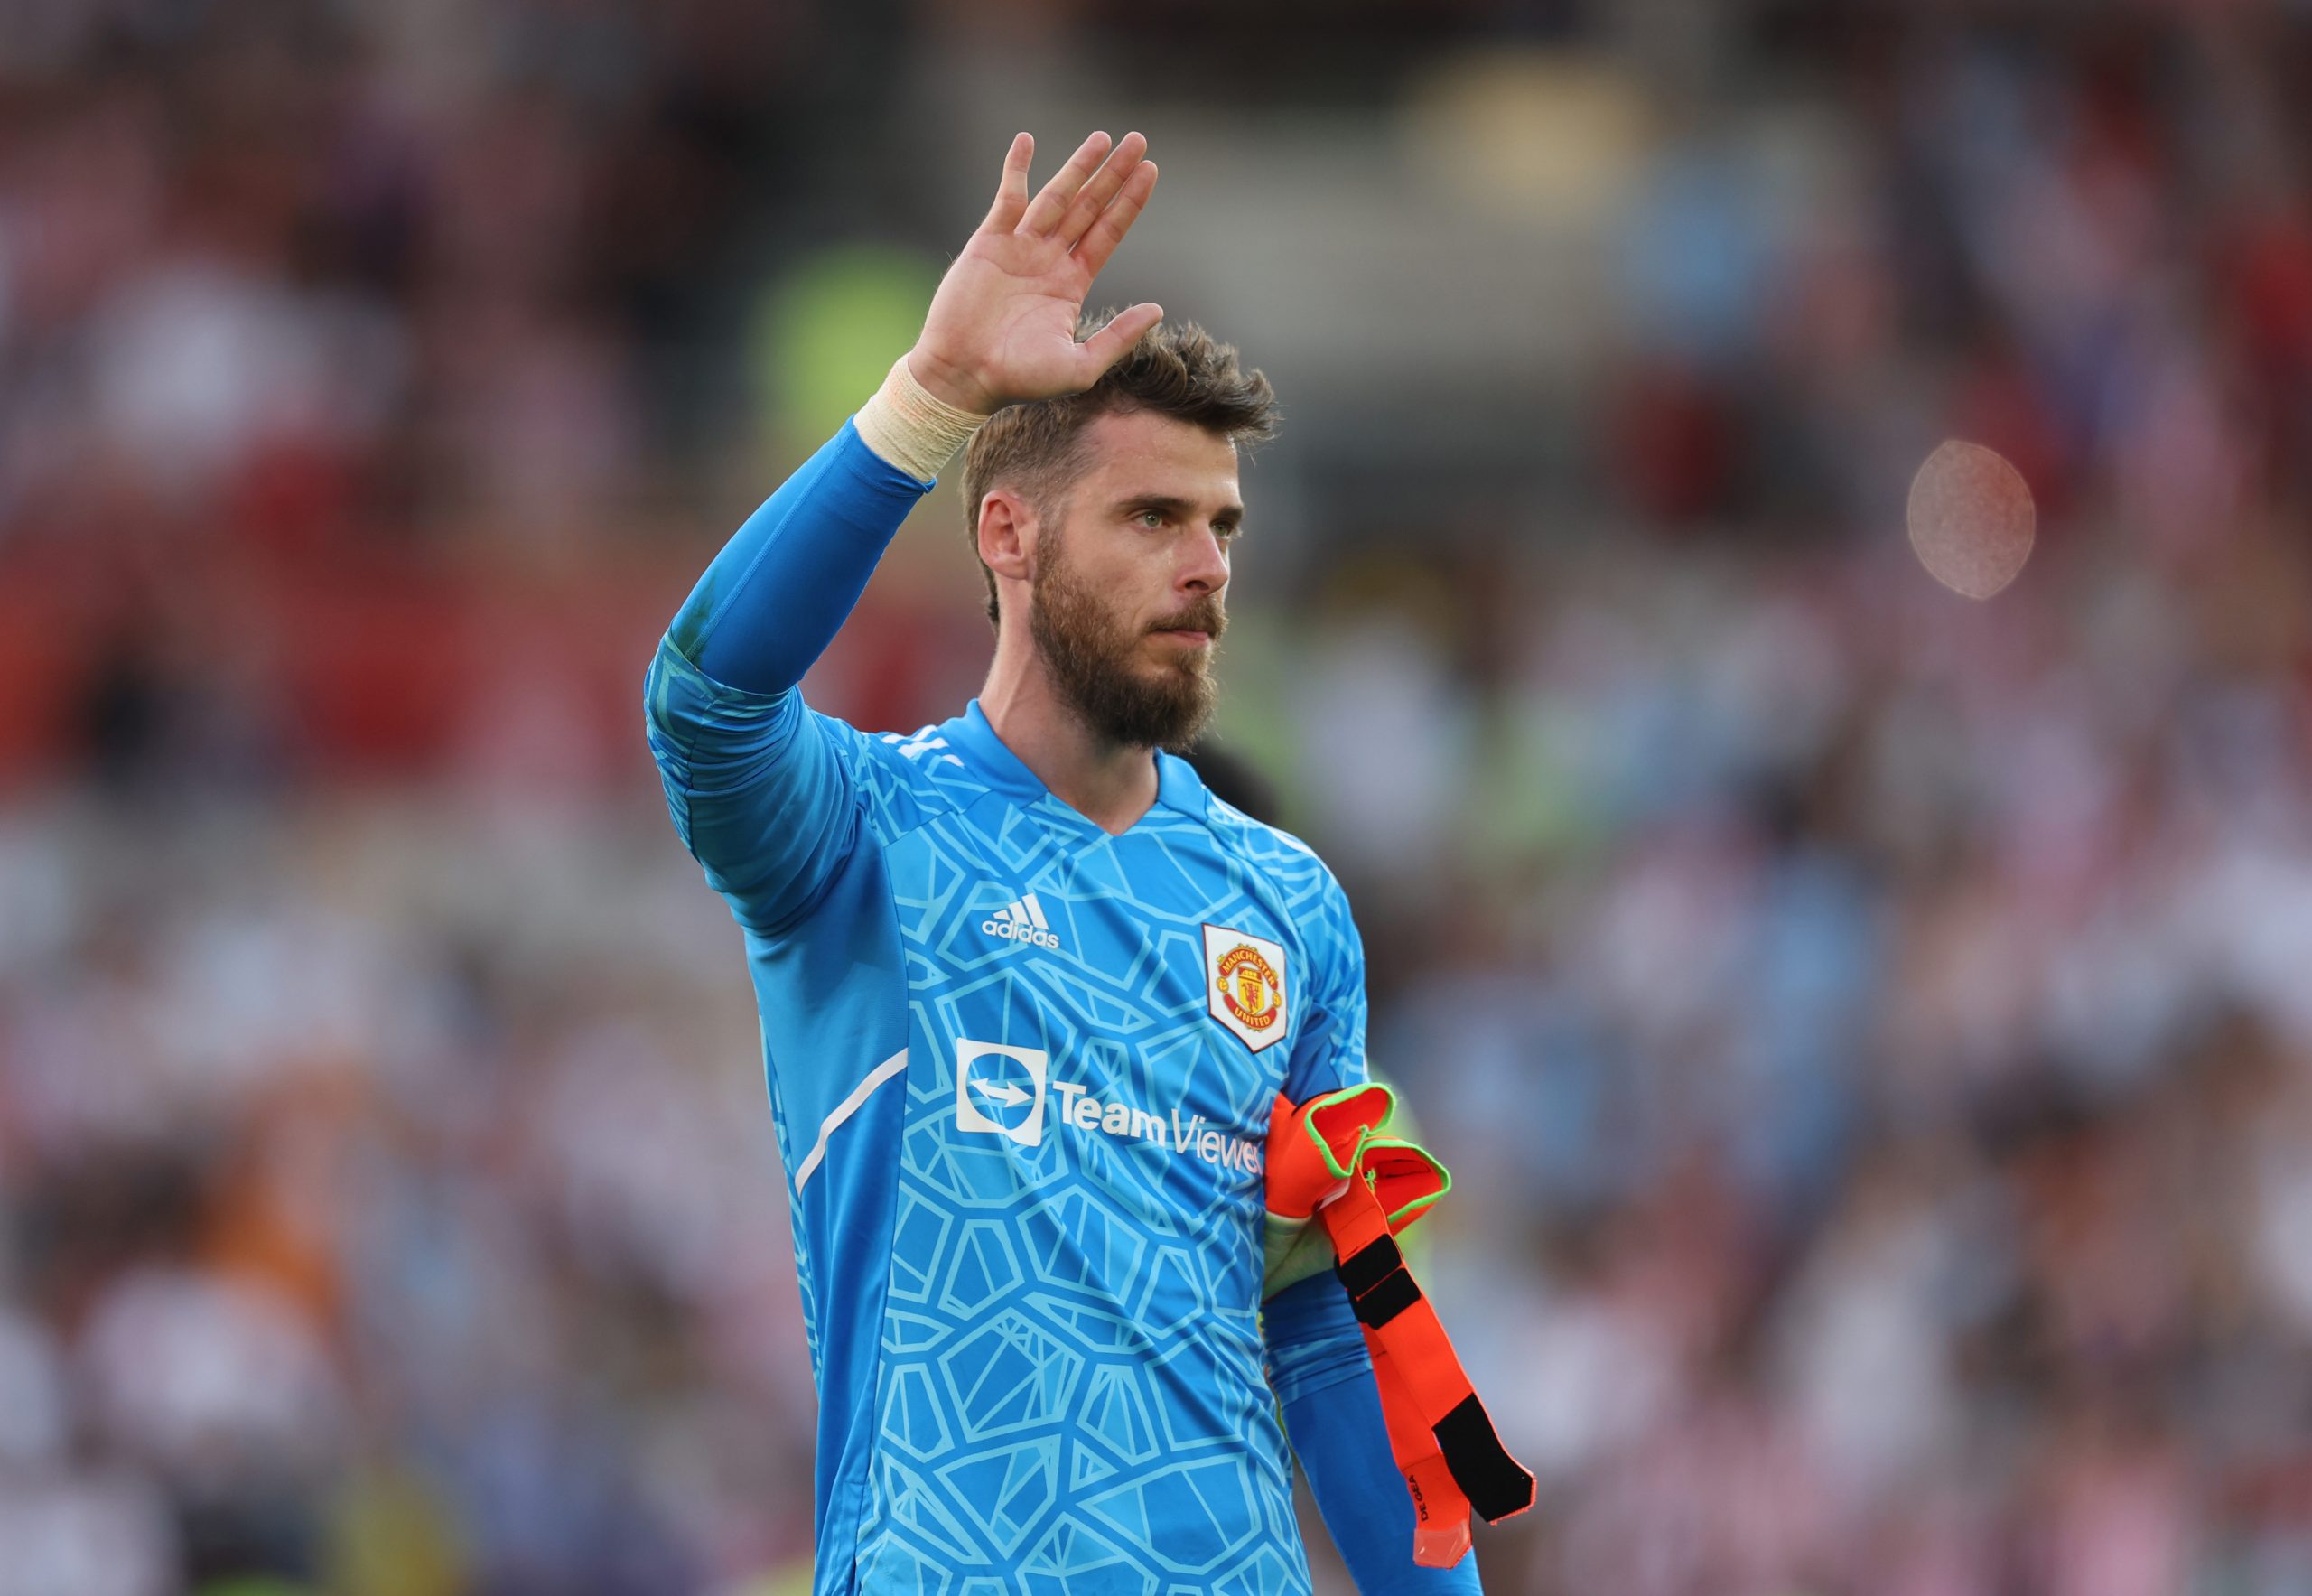 David de Gea is Manchester United's first choice goalkeeper. (Photo by Catherine Ivill/Getty Images)